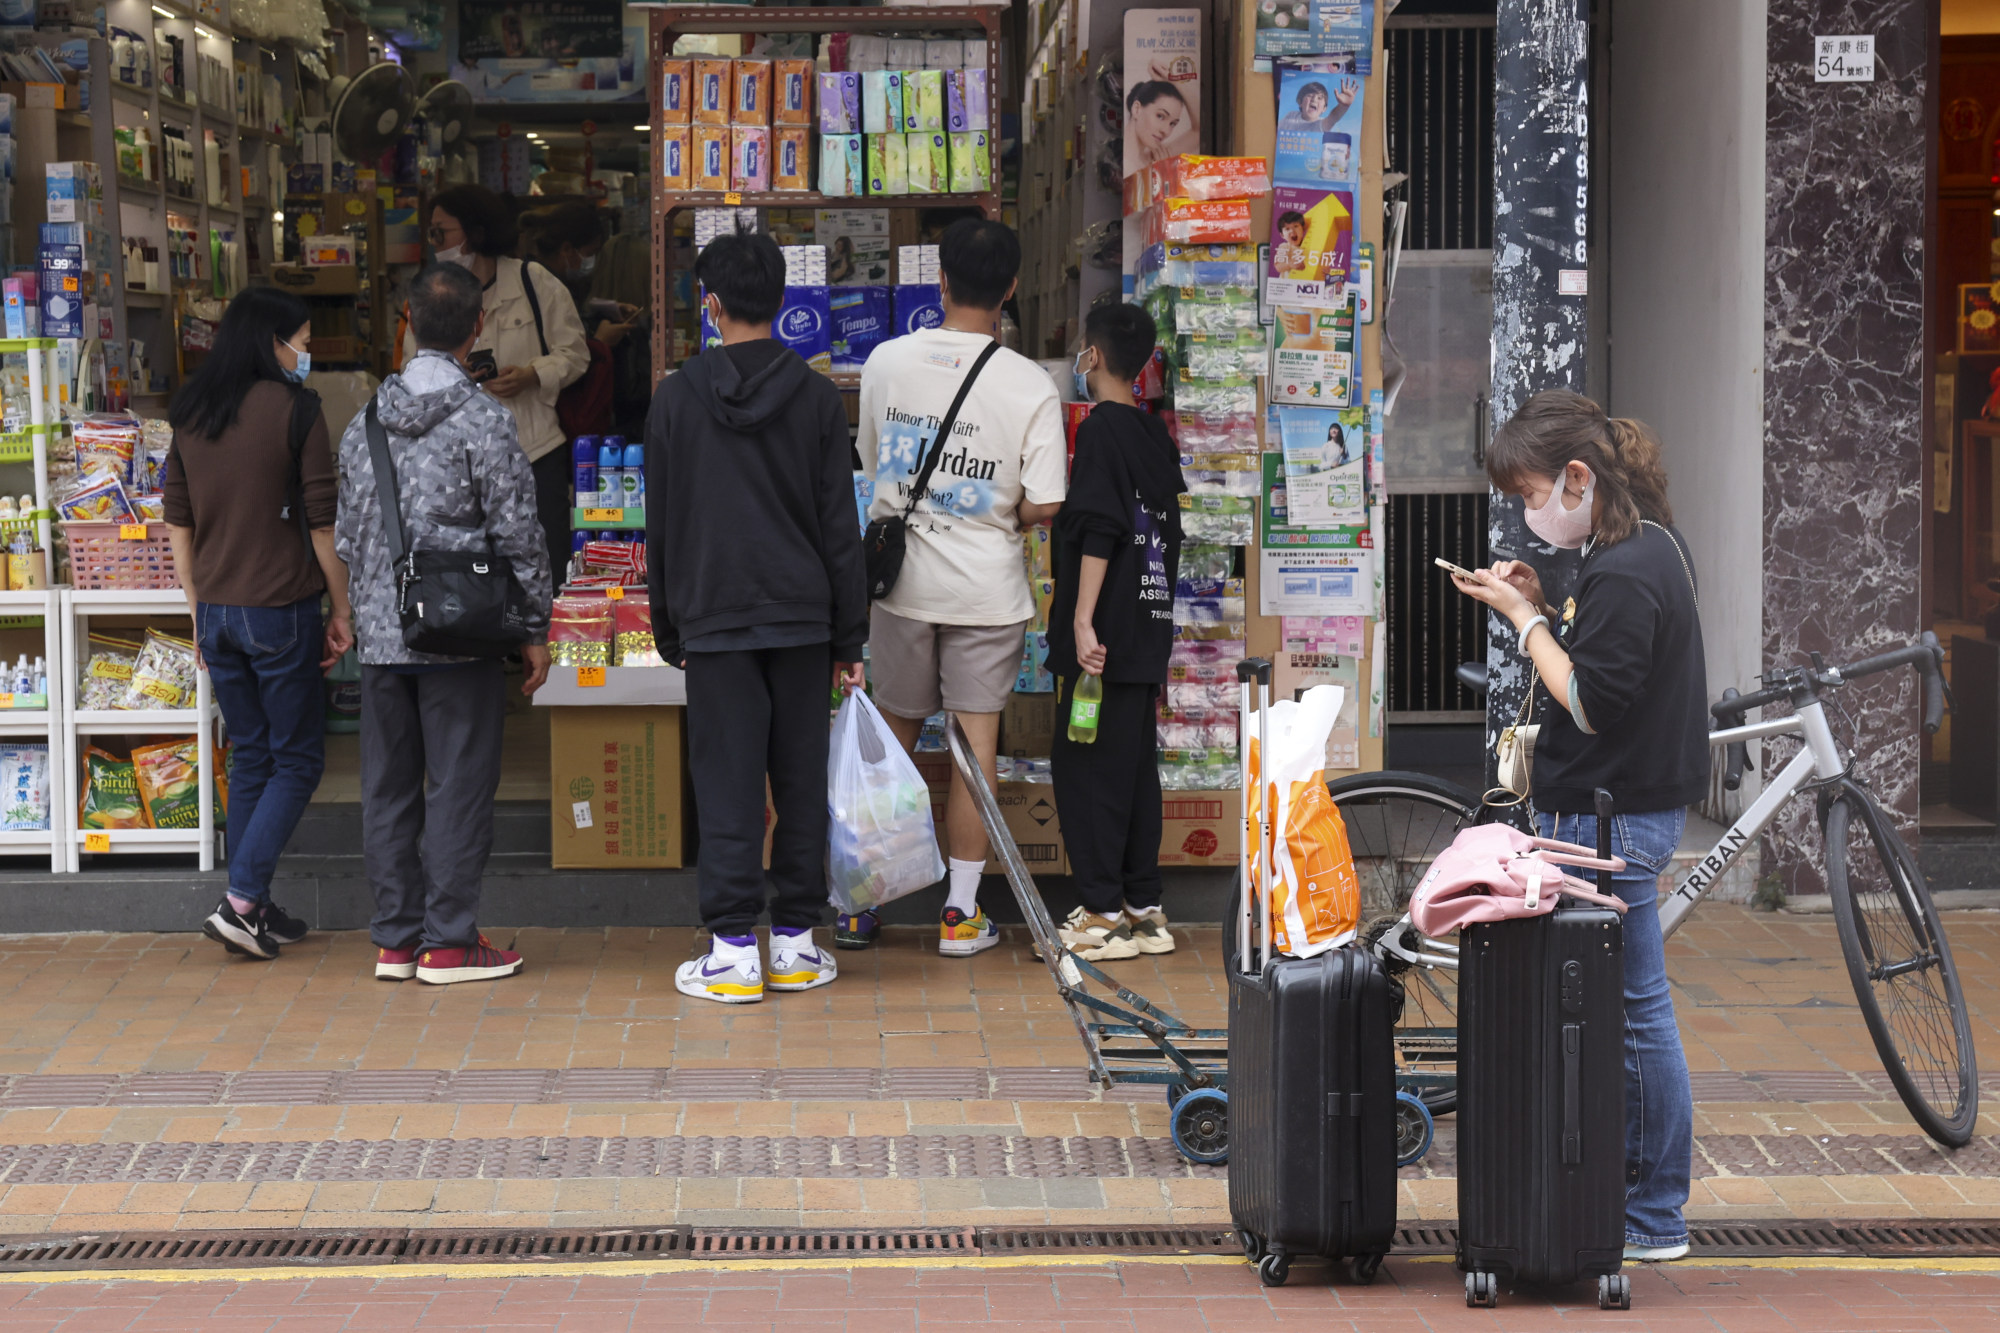 Tourists and parallel goods trader shopping in Sheung Shui area in the New Territories near the mainland China border on February 12. Photo: Edmond So